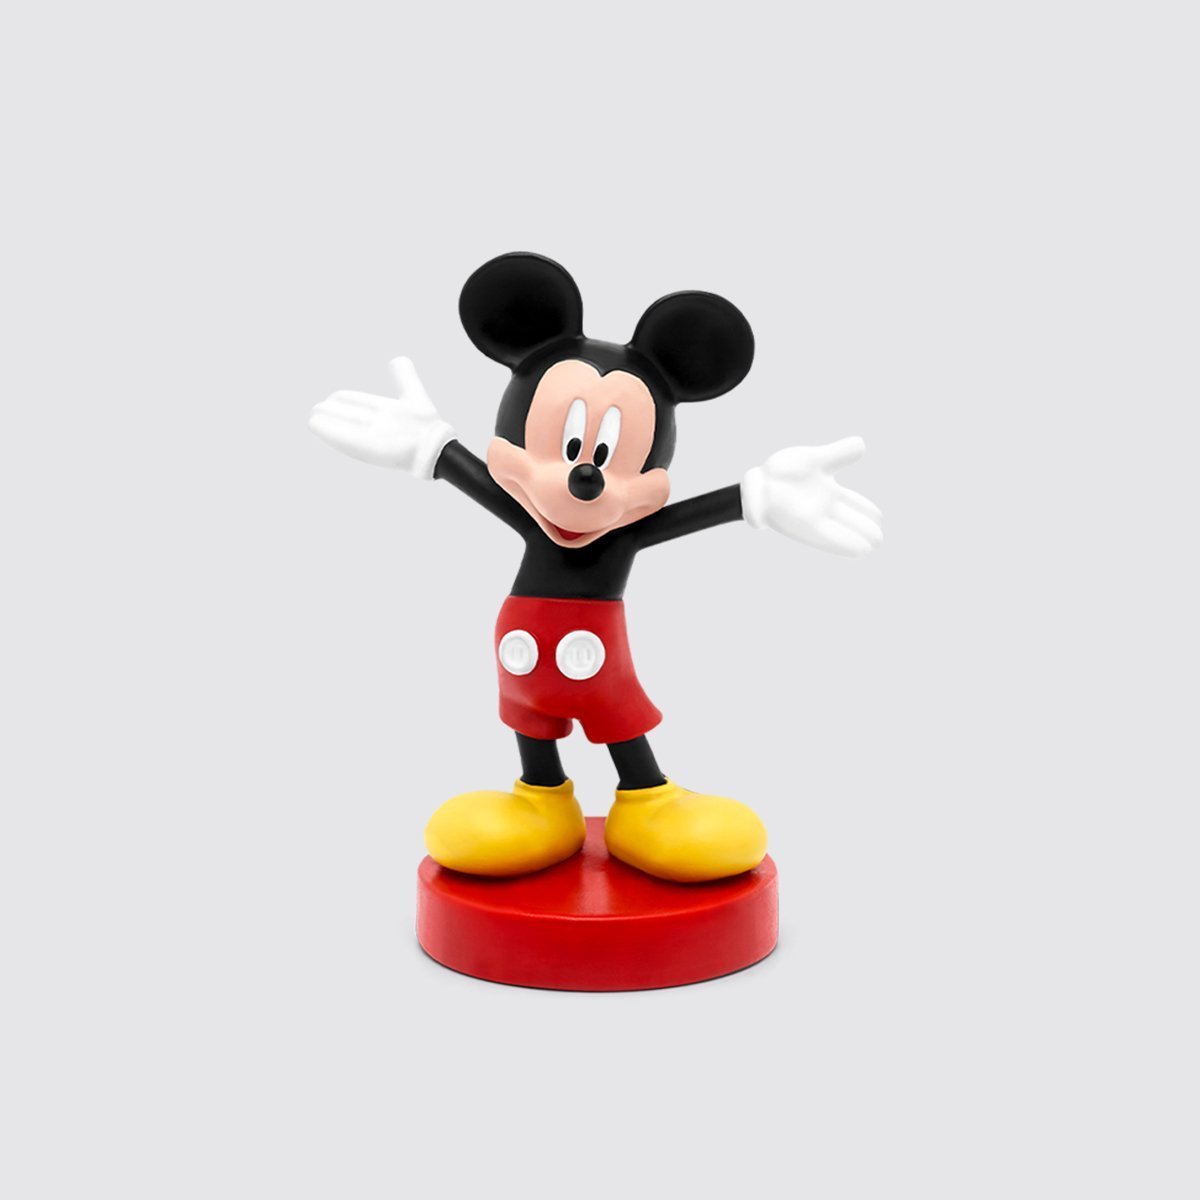 MICKEY MOUSE CLUBHOUSE GAME Free Games online for kids in Pre-K by